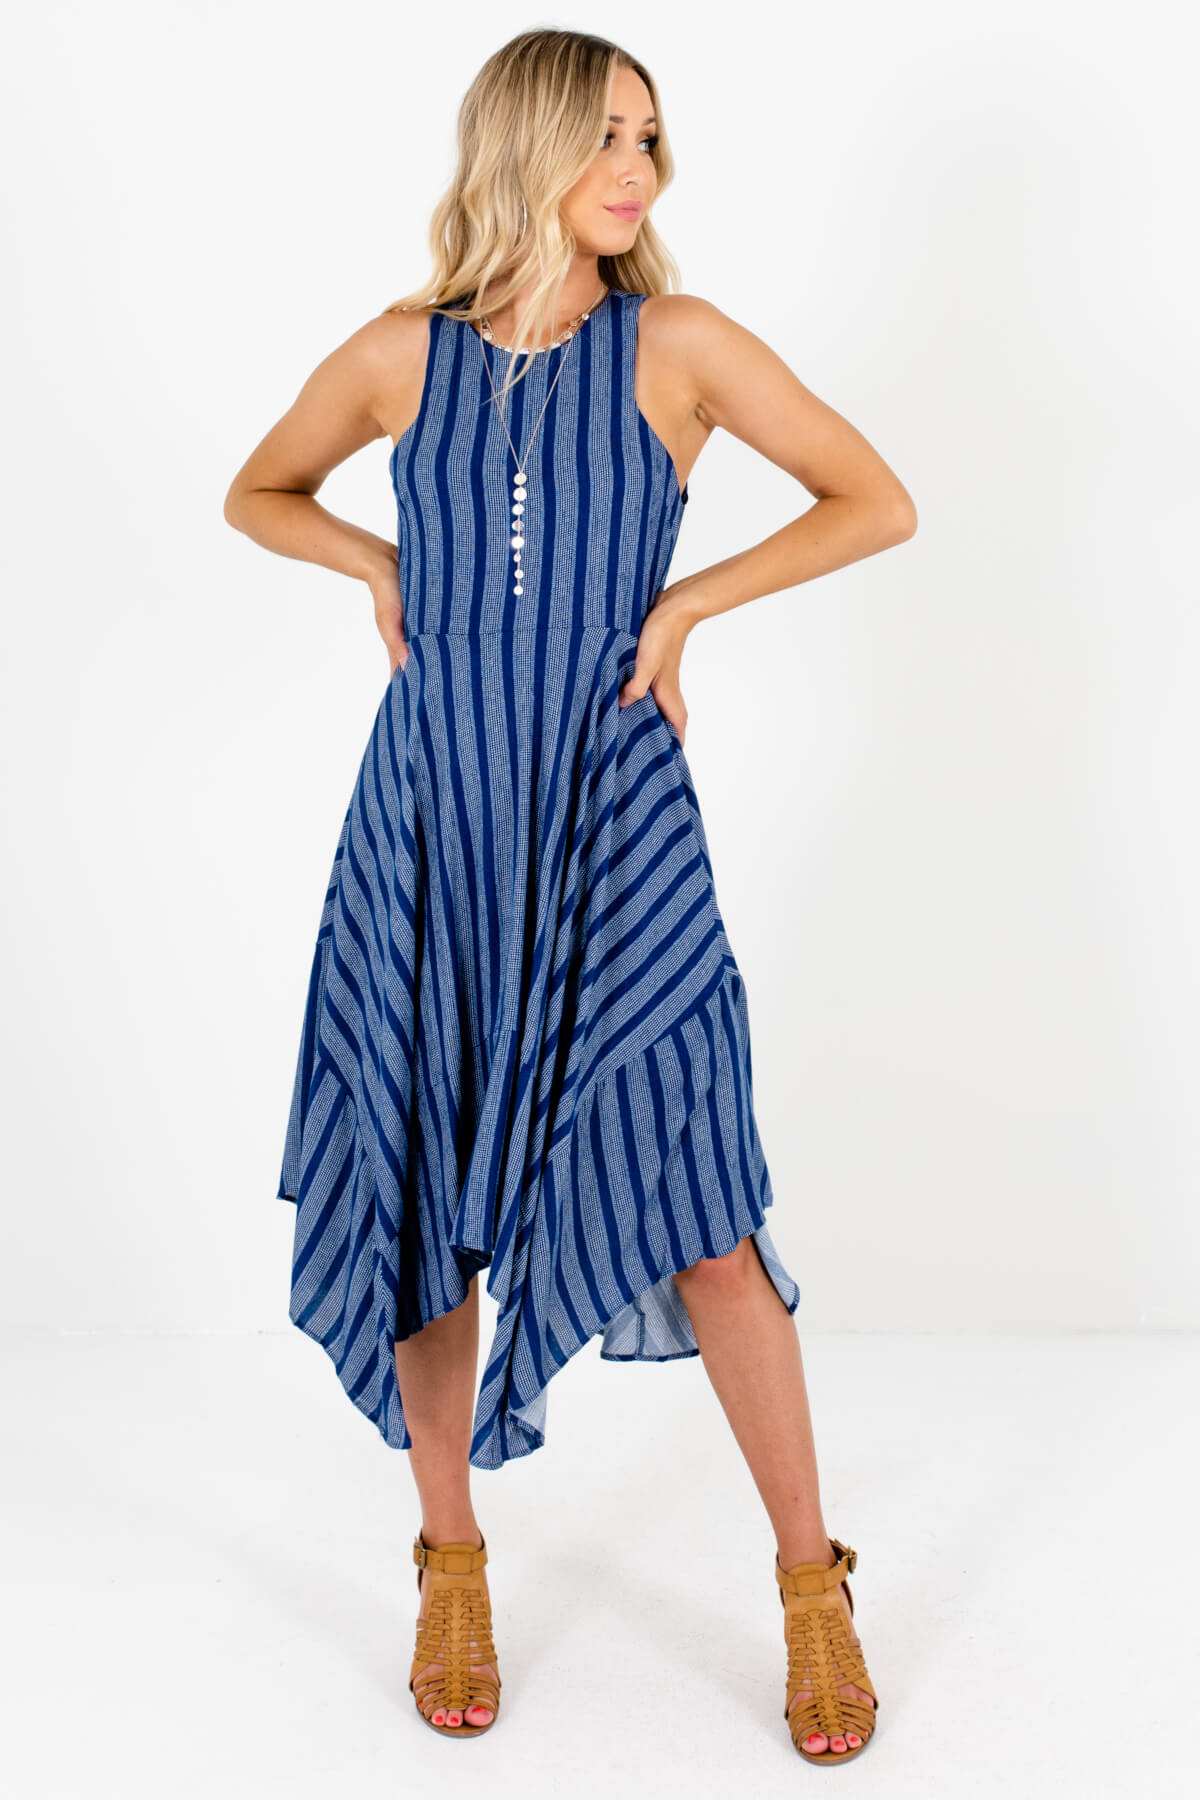 Blue Cute and Comfortable Boutique Dresses for Women